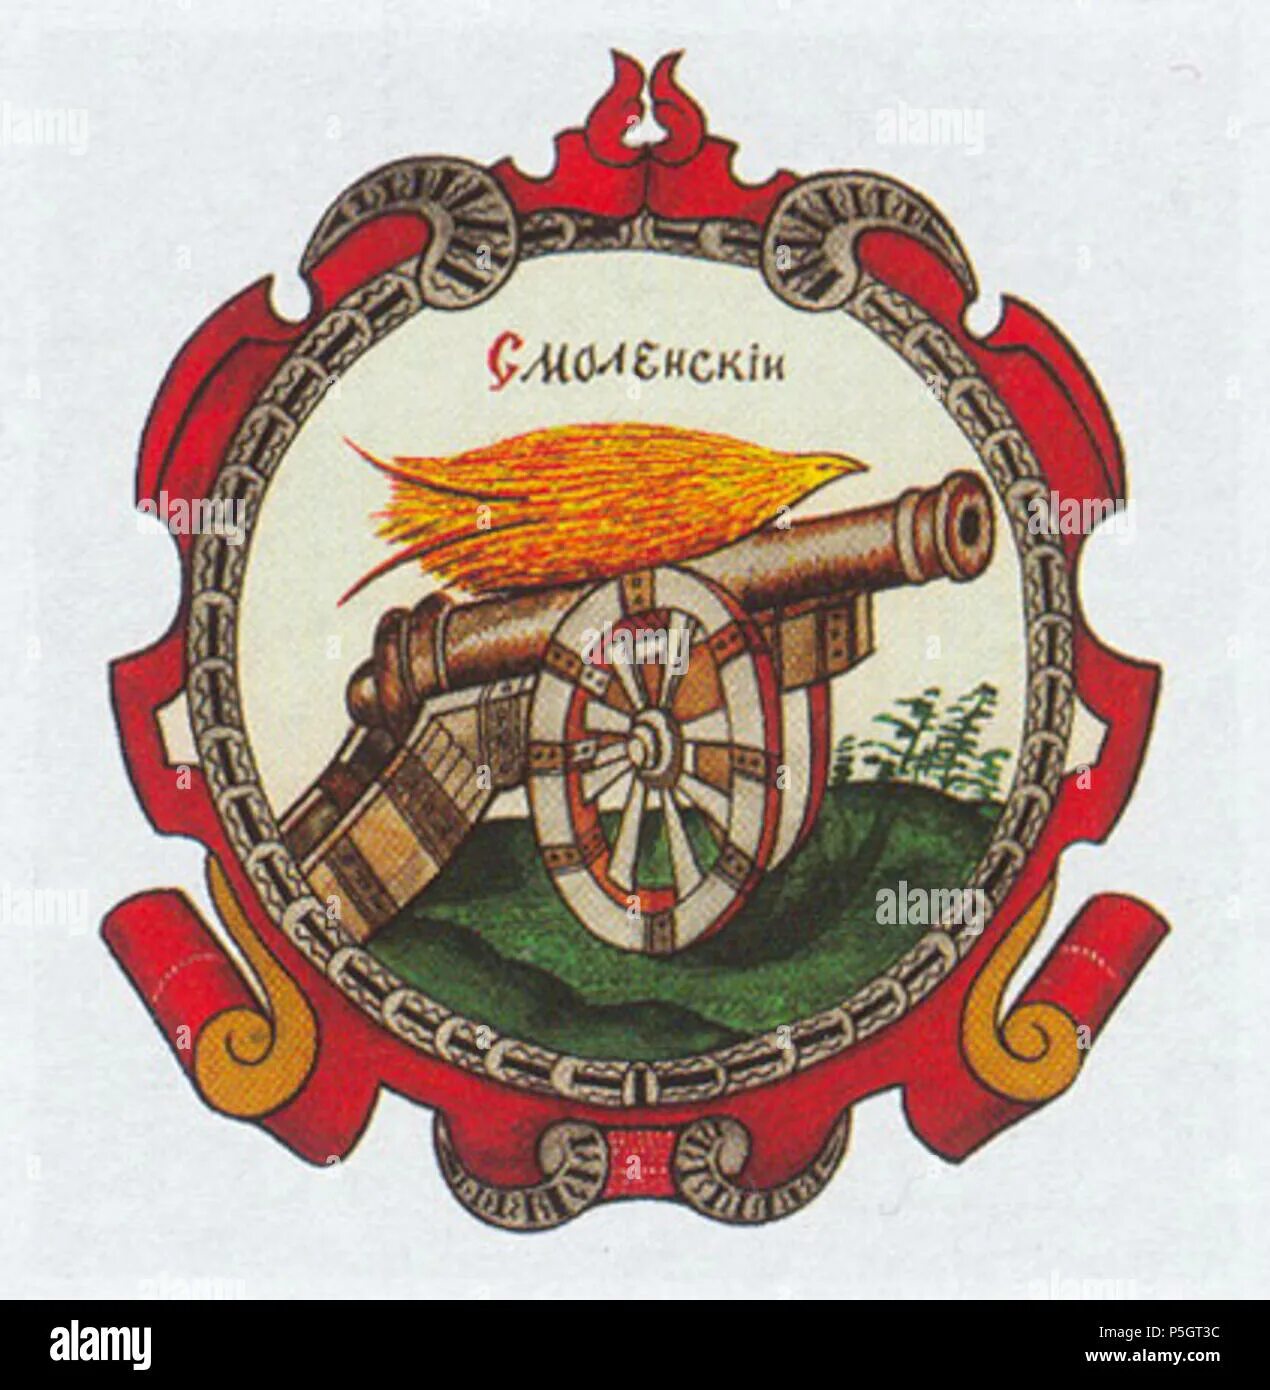 Coat of arms of Smolensk #2